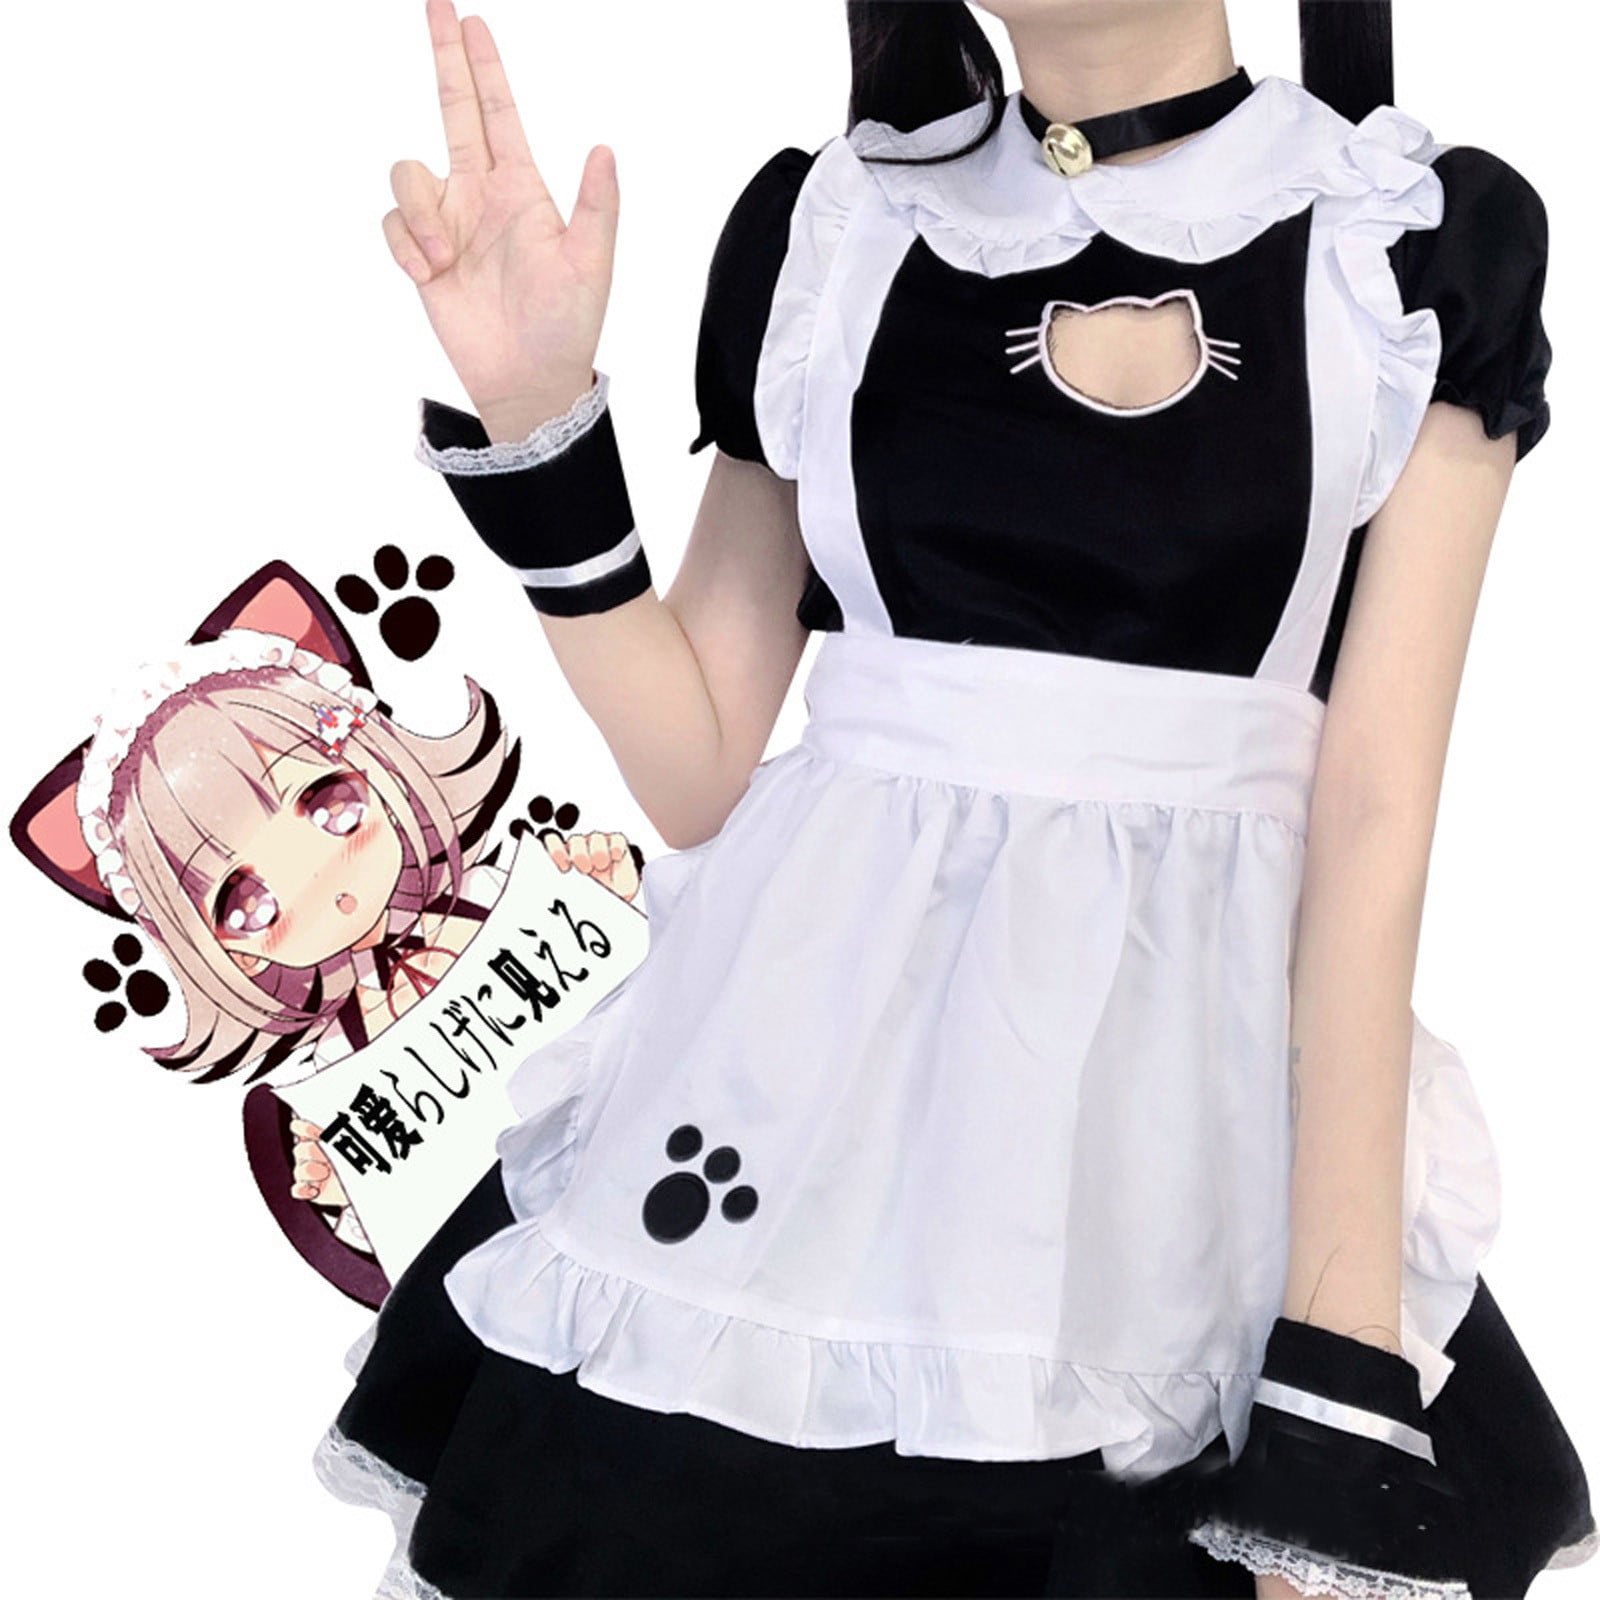 aihihe Women Anime Maid Dress Adult French Apron Fancy Cosplay Short Sleeve Outfit Clubwear Fancy Dress 